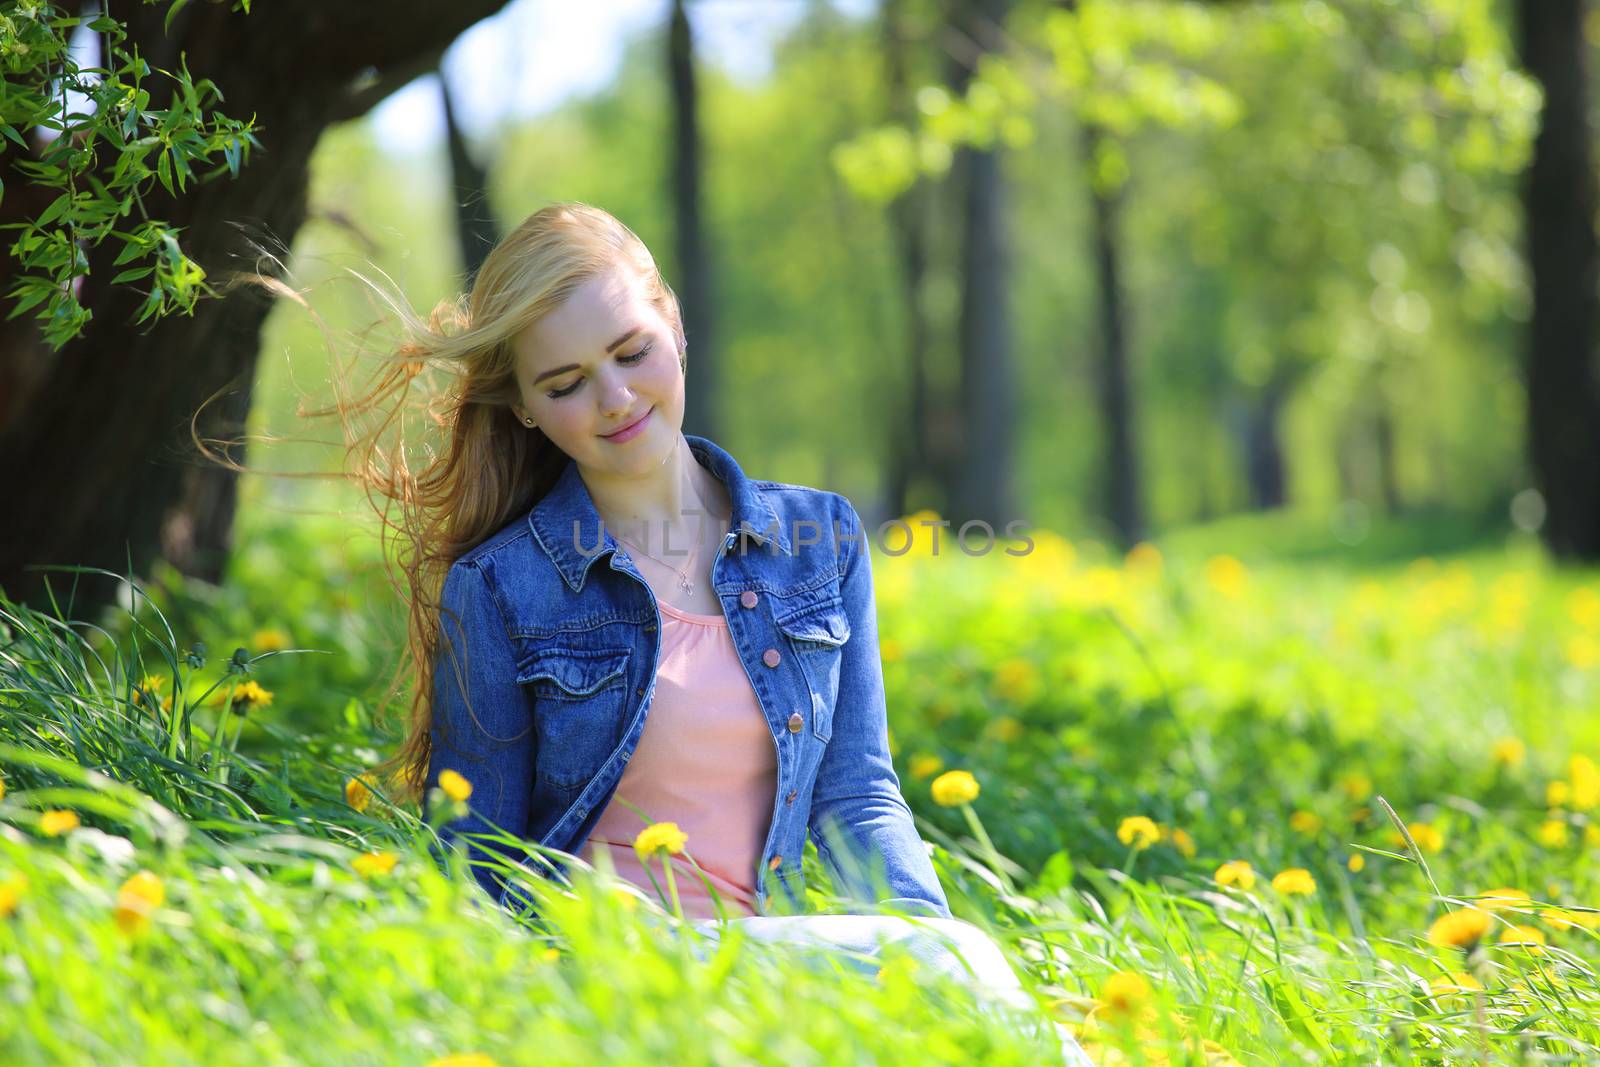 Beautiful young woman sitting in spring park with dandelion flowers